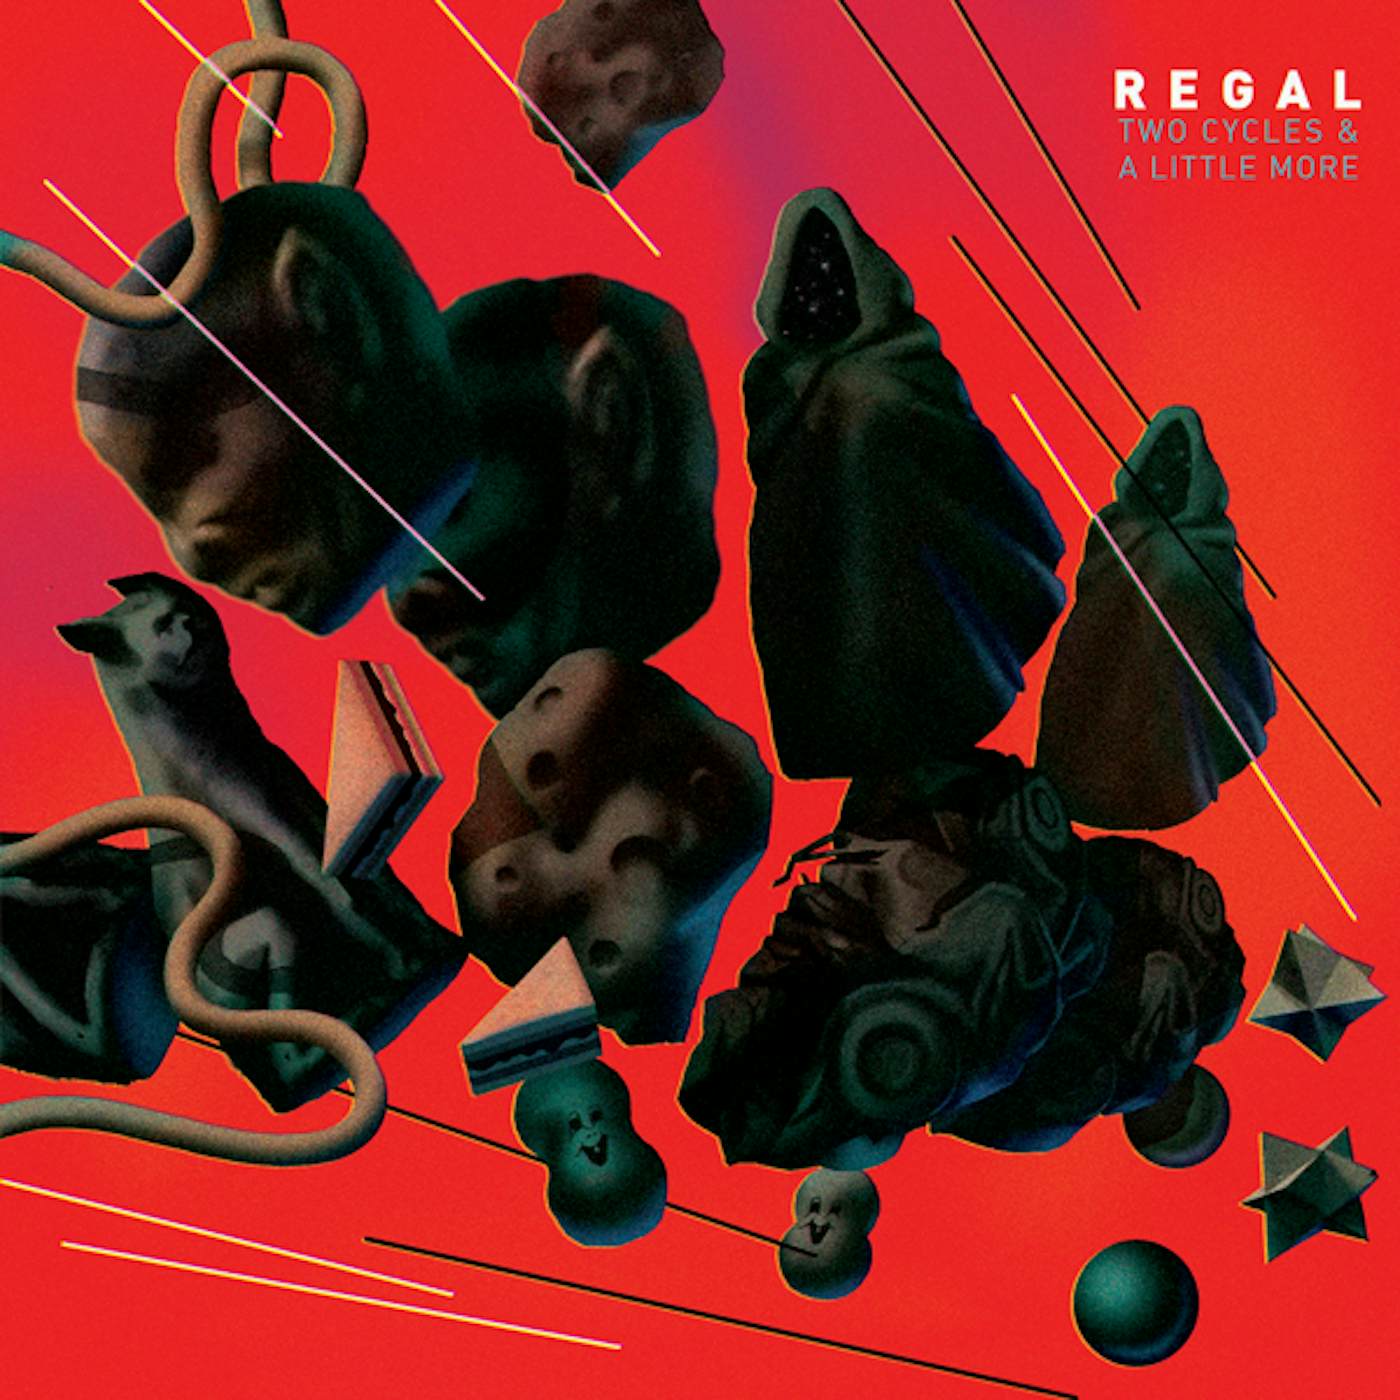 Regal Two Cycles And A Little More Vinyl Record